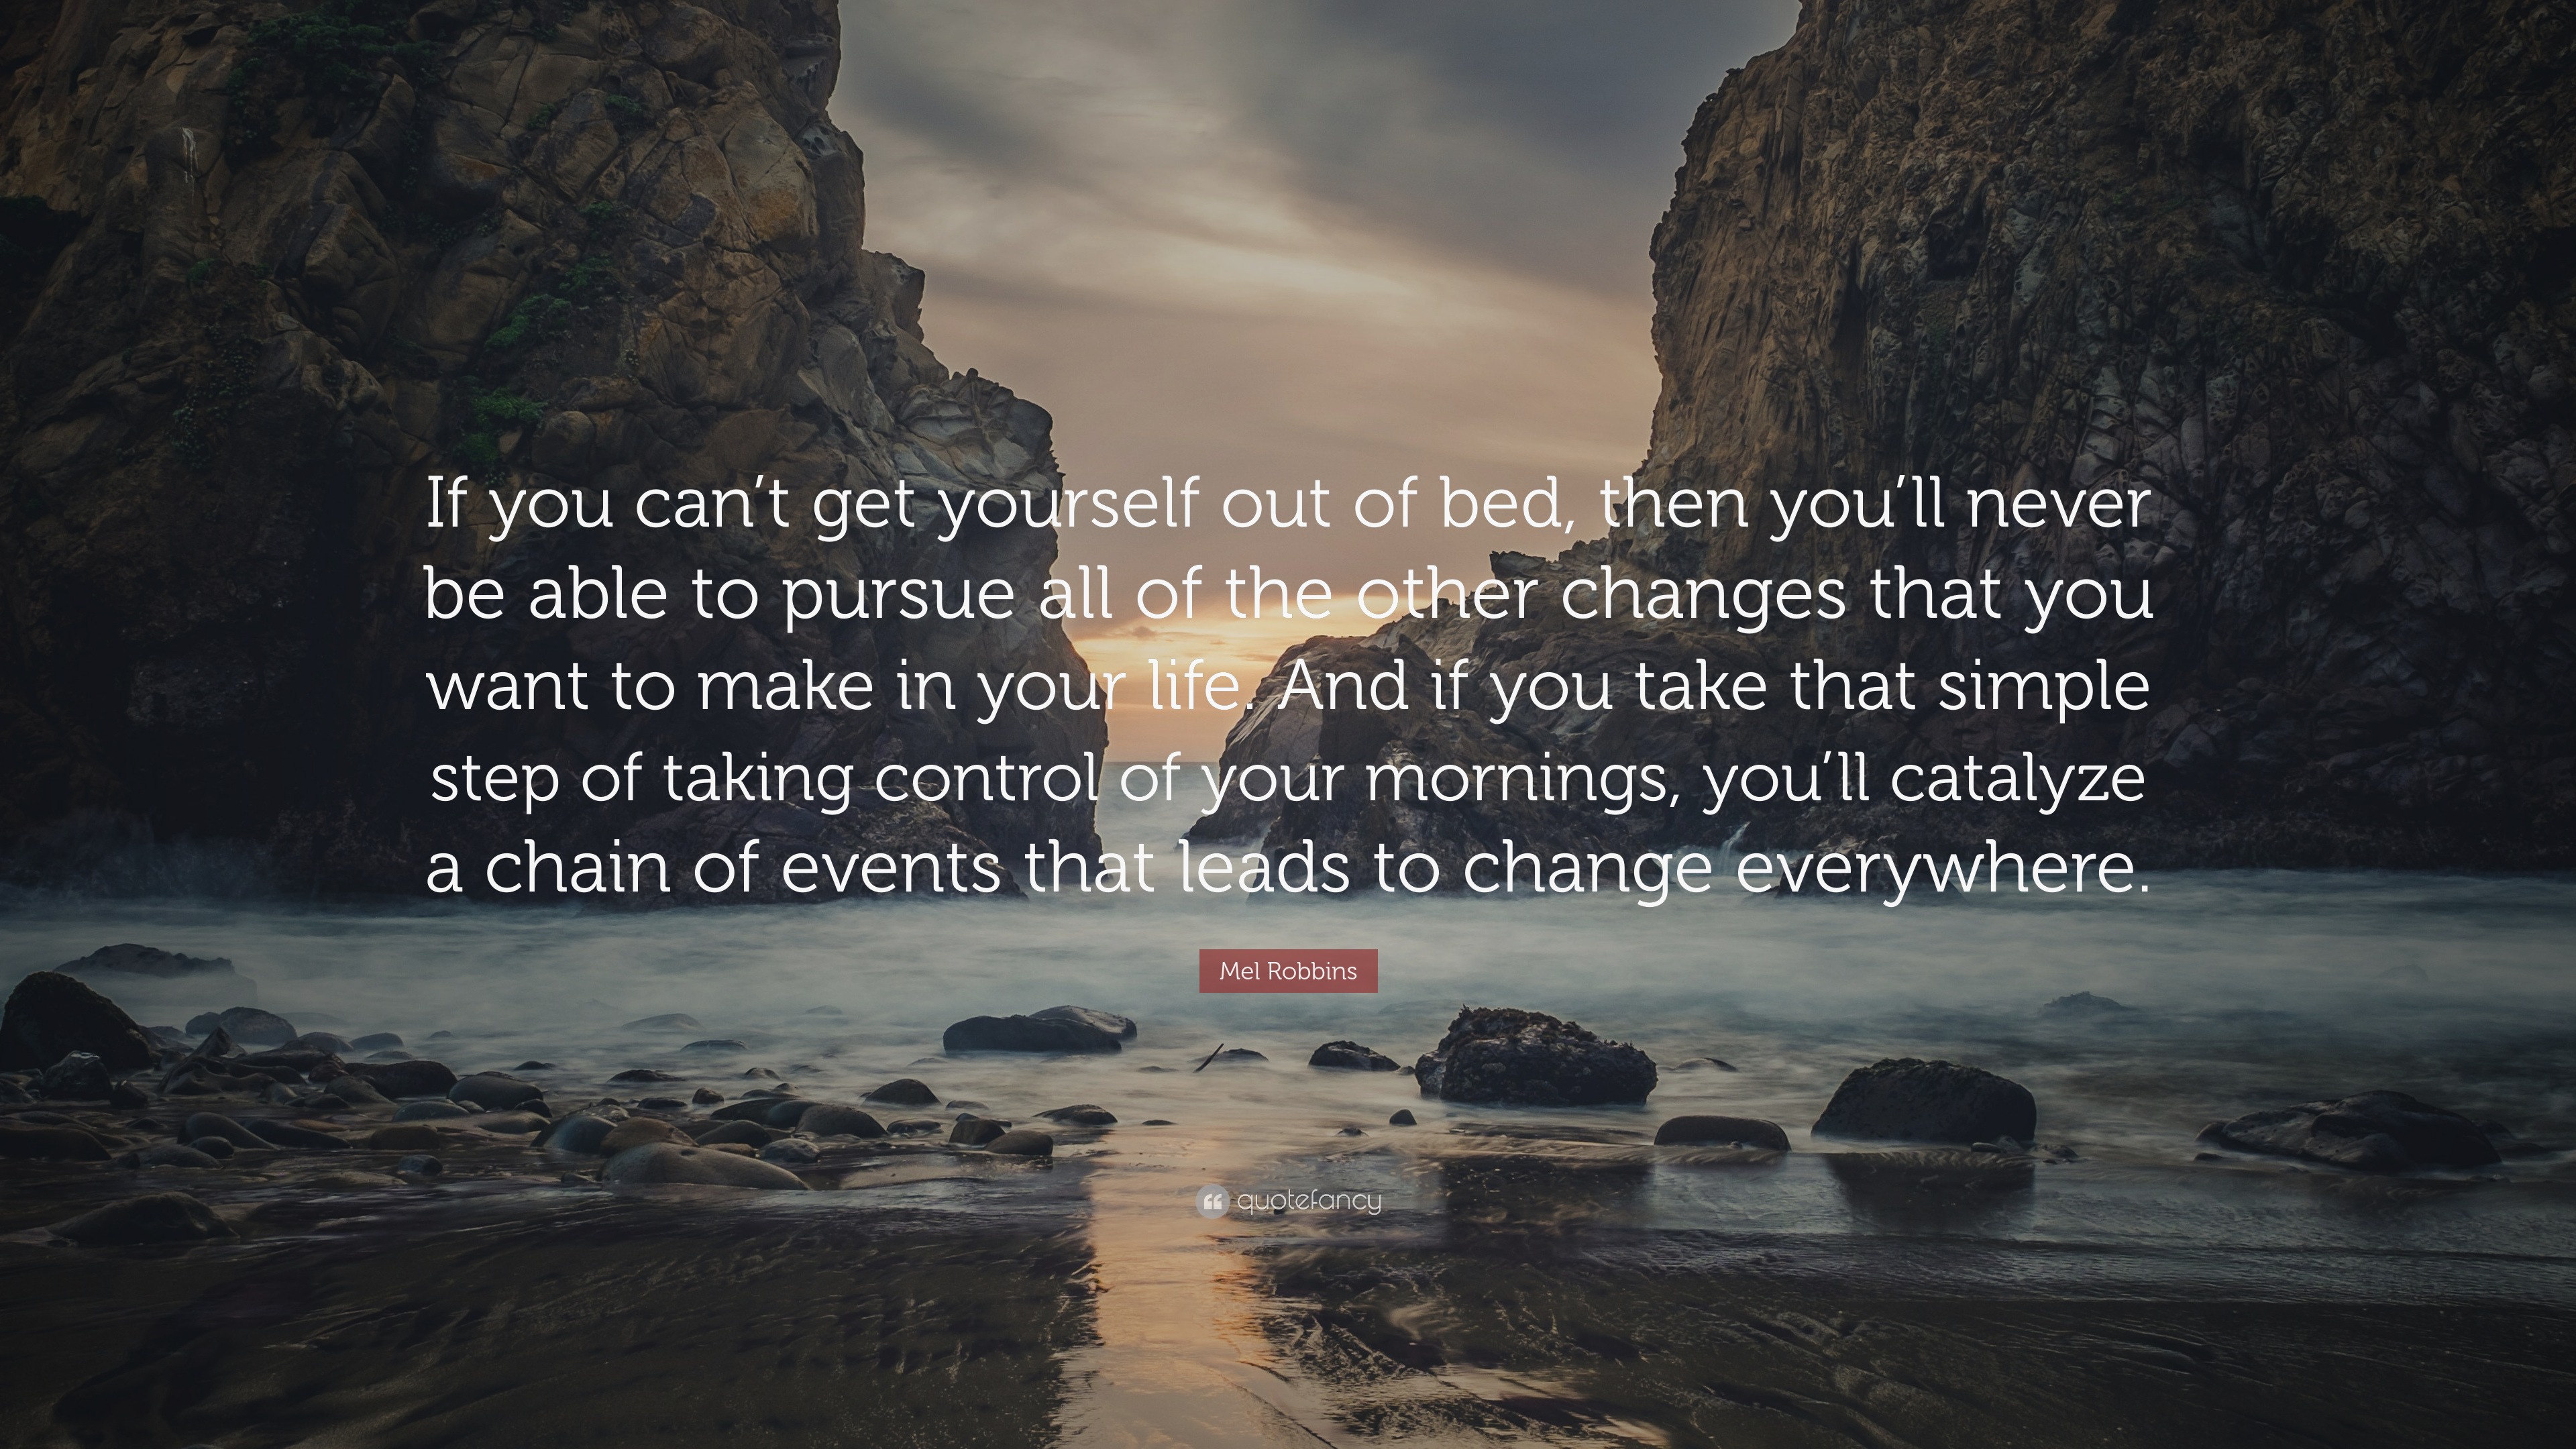 Mel Robbins Quote If You Can T Get Yourself Out Of Bed Then You Ll Never Be Able To Pursue All Of The Other Changes That You Want To Make